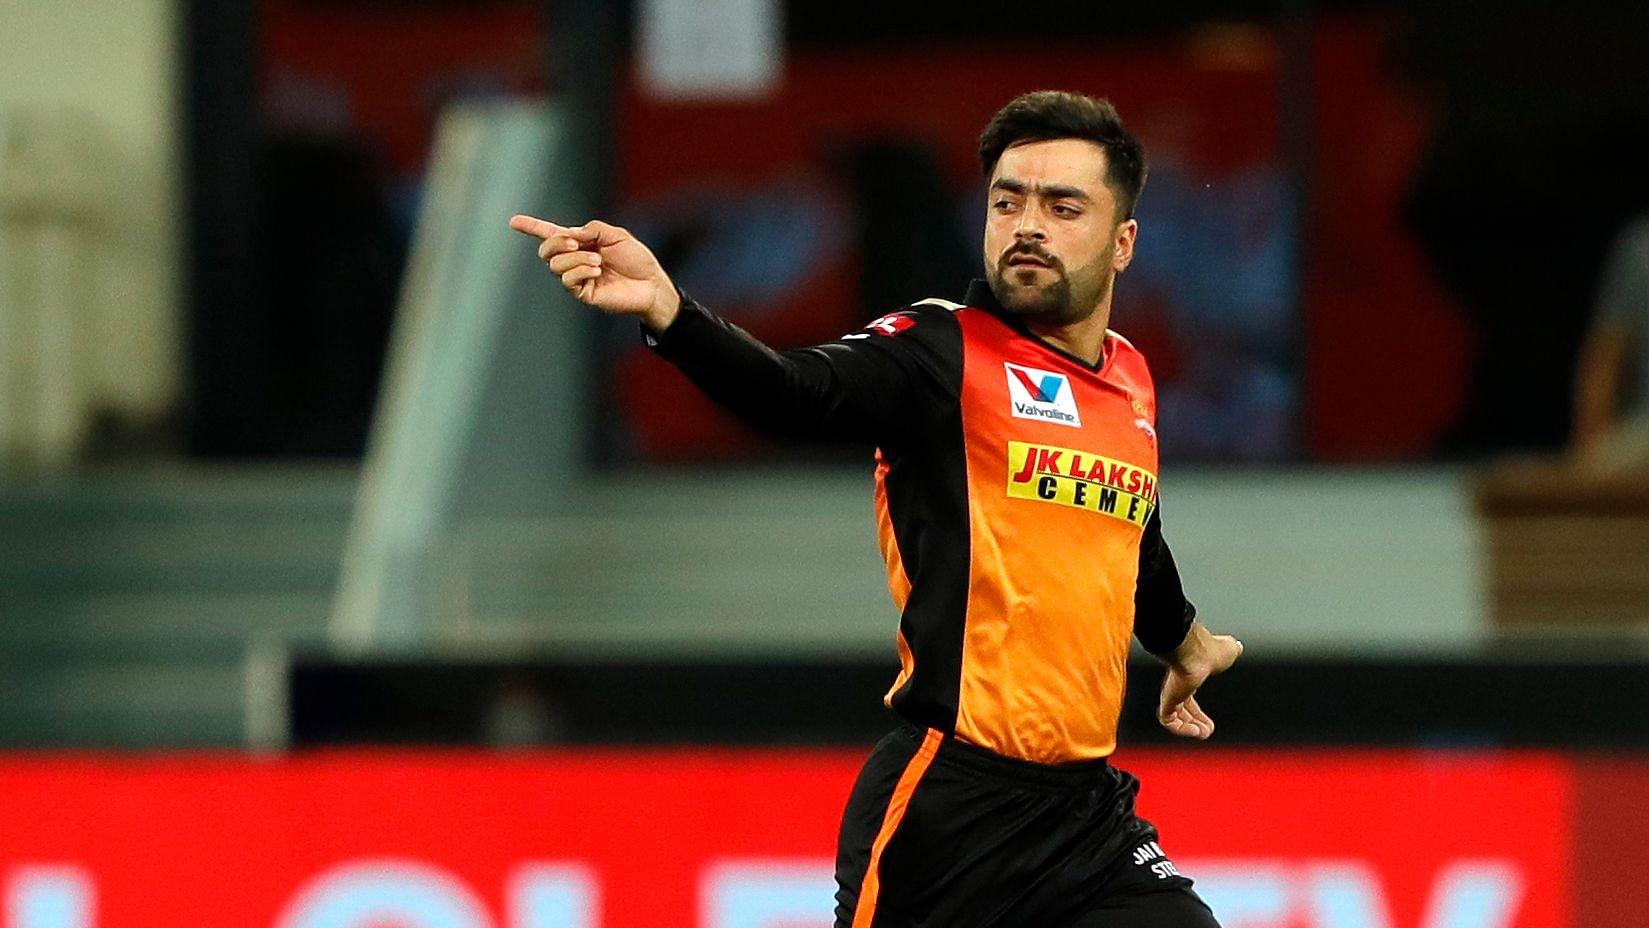 Rashid Khan has been a very important part of the SRH campaign with his impressive bowling efforts. He took 20 wickets in IPL 2020.&nbsp;